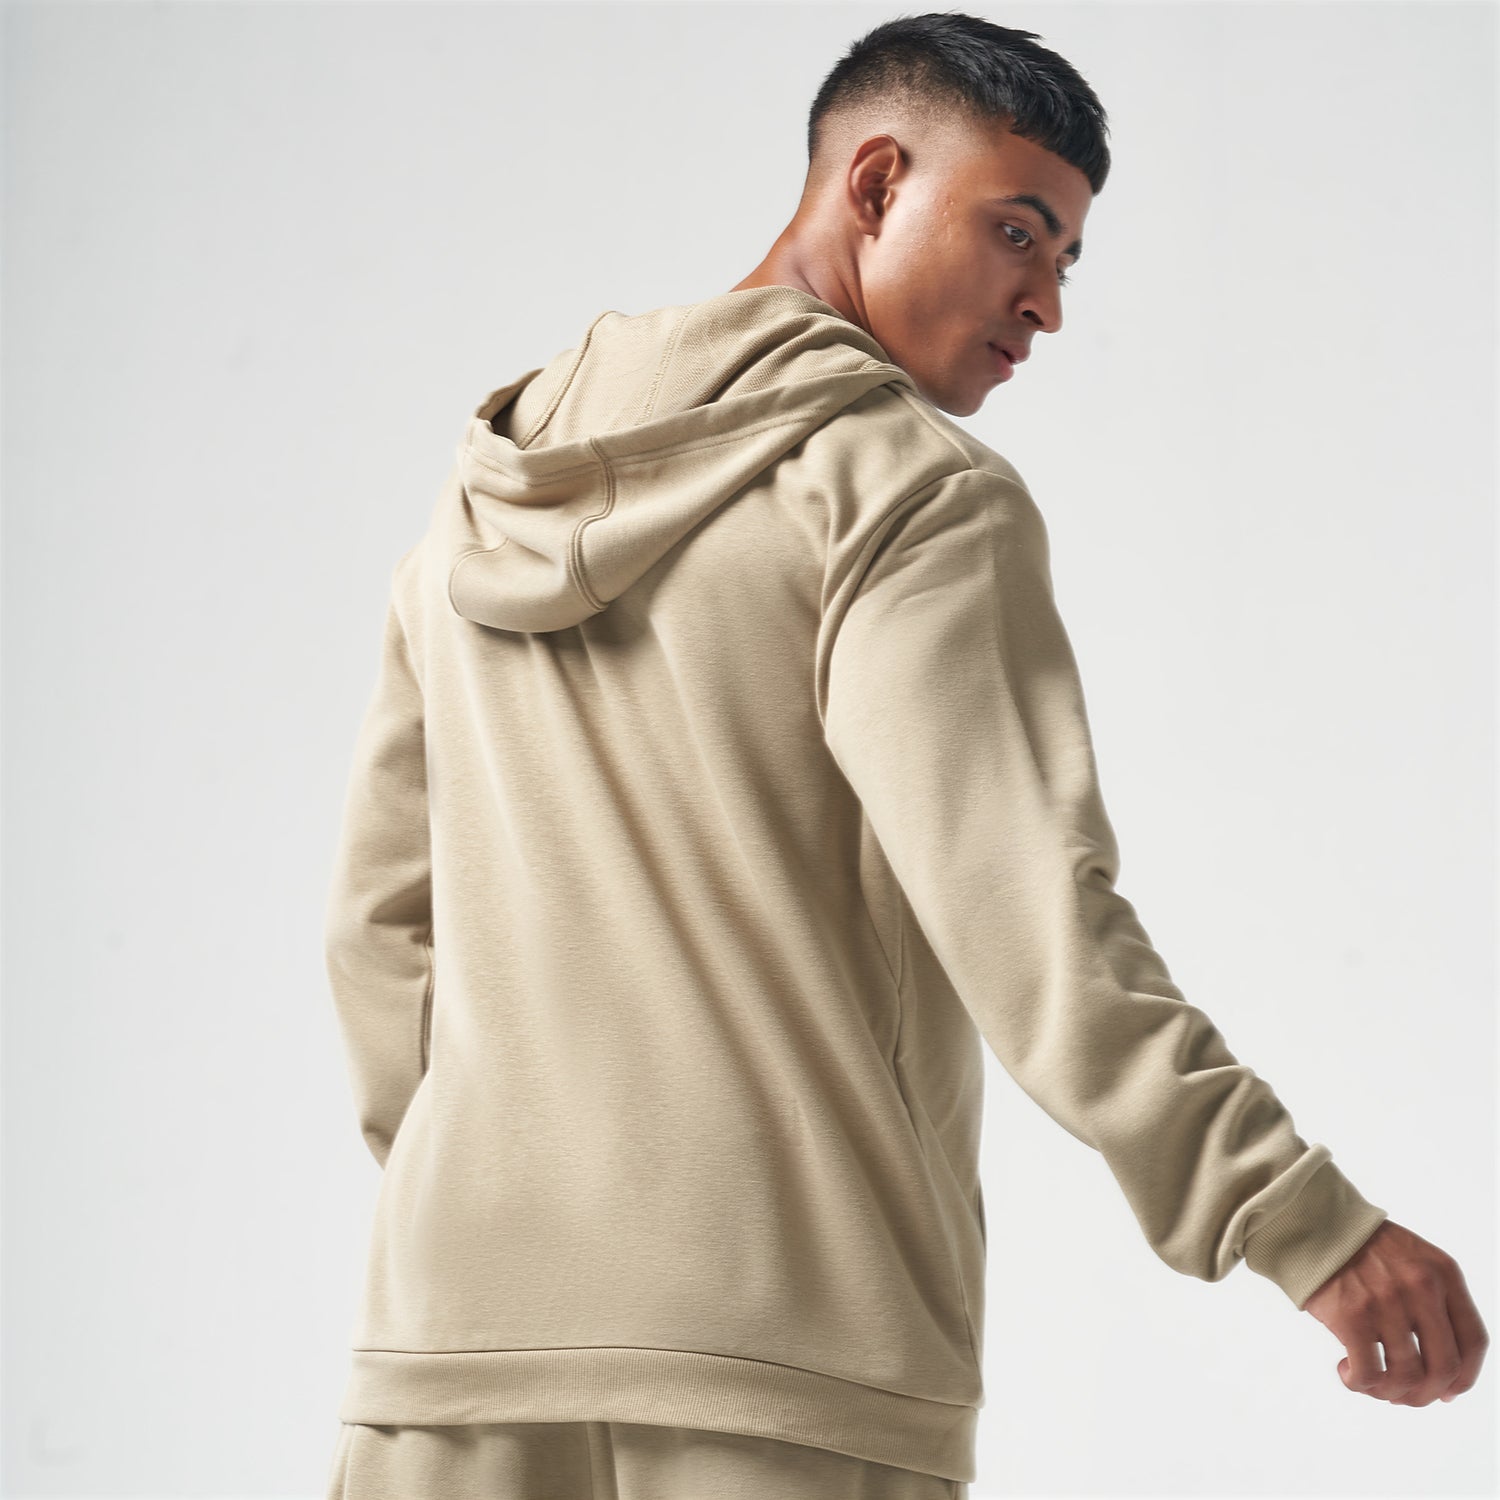 squatwolf-gym-wear-essential-zipped-hoodie-sand-workout-hoodie-for-men